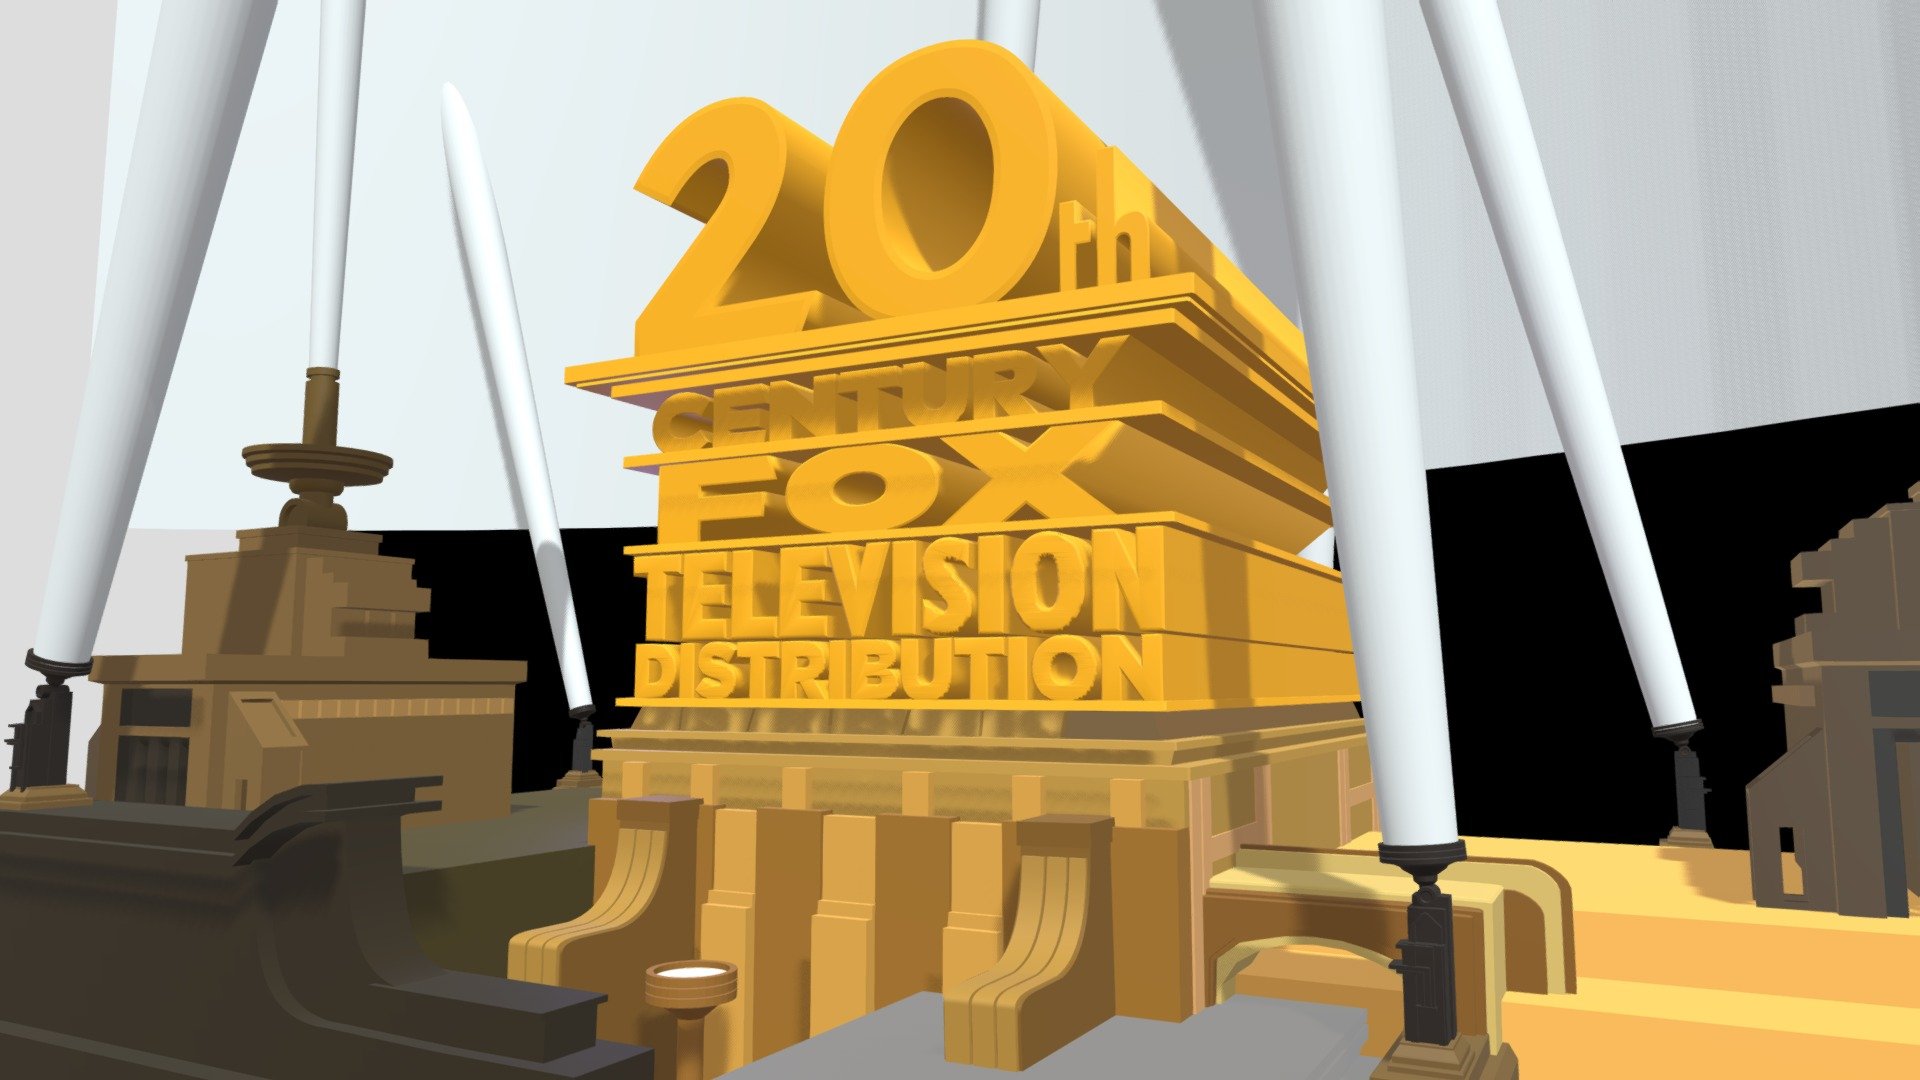 20th Century Fox Television Distribution - 3D model by ...